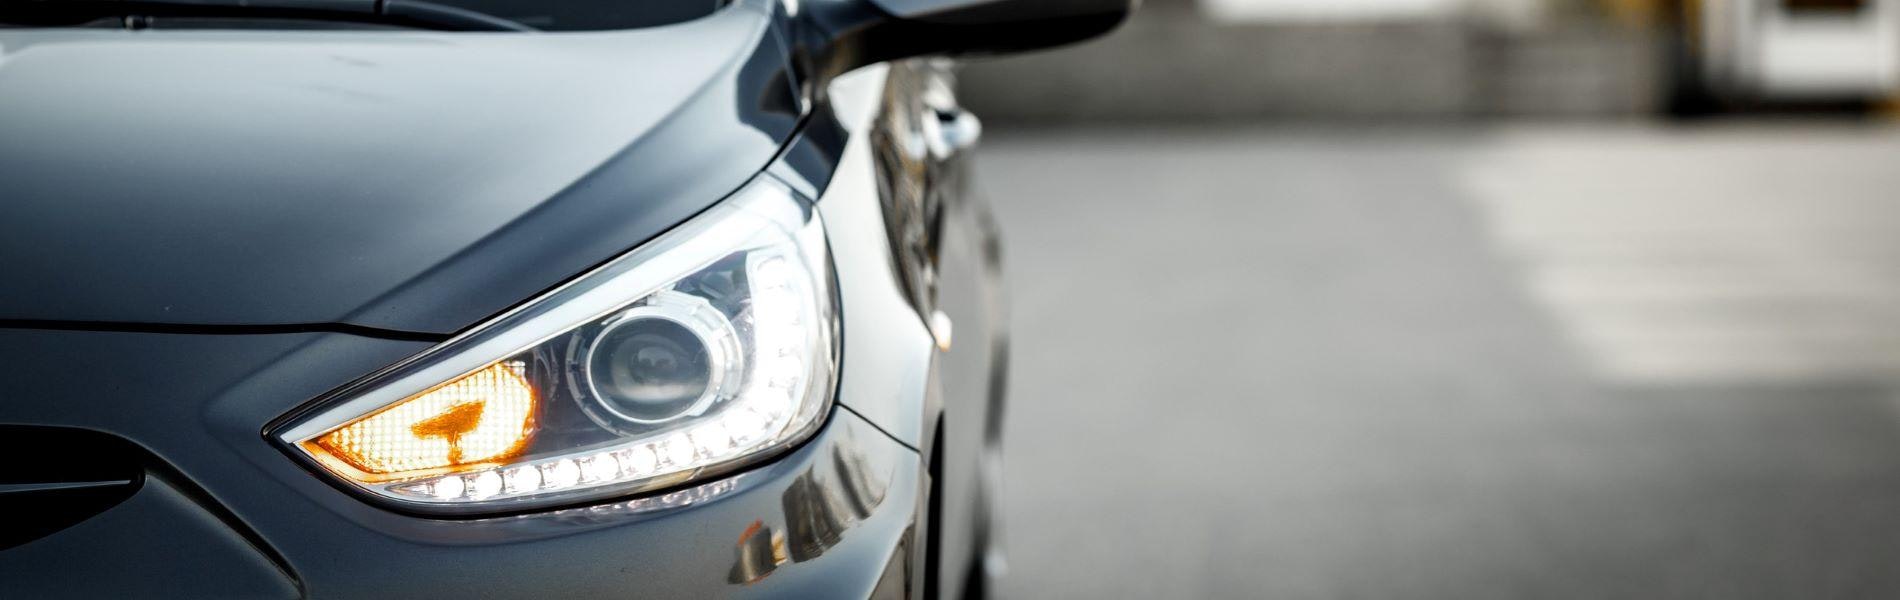 Light The Way With a Headlight Cleaning From Jiffy Lube - Jiffy Lube Jiffy  Lube